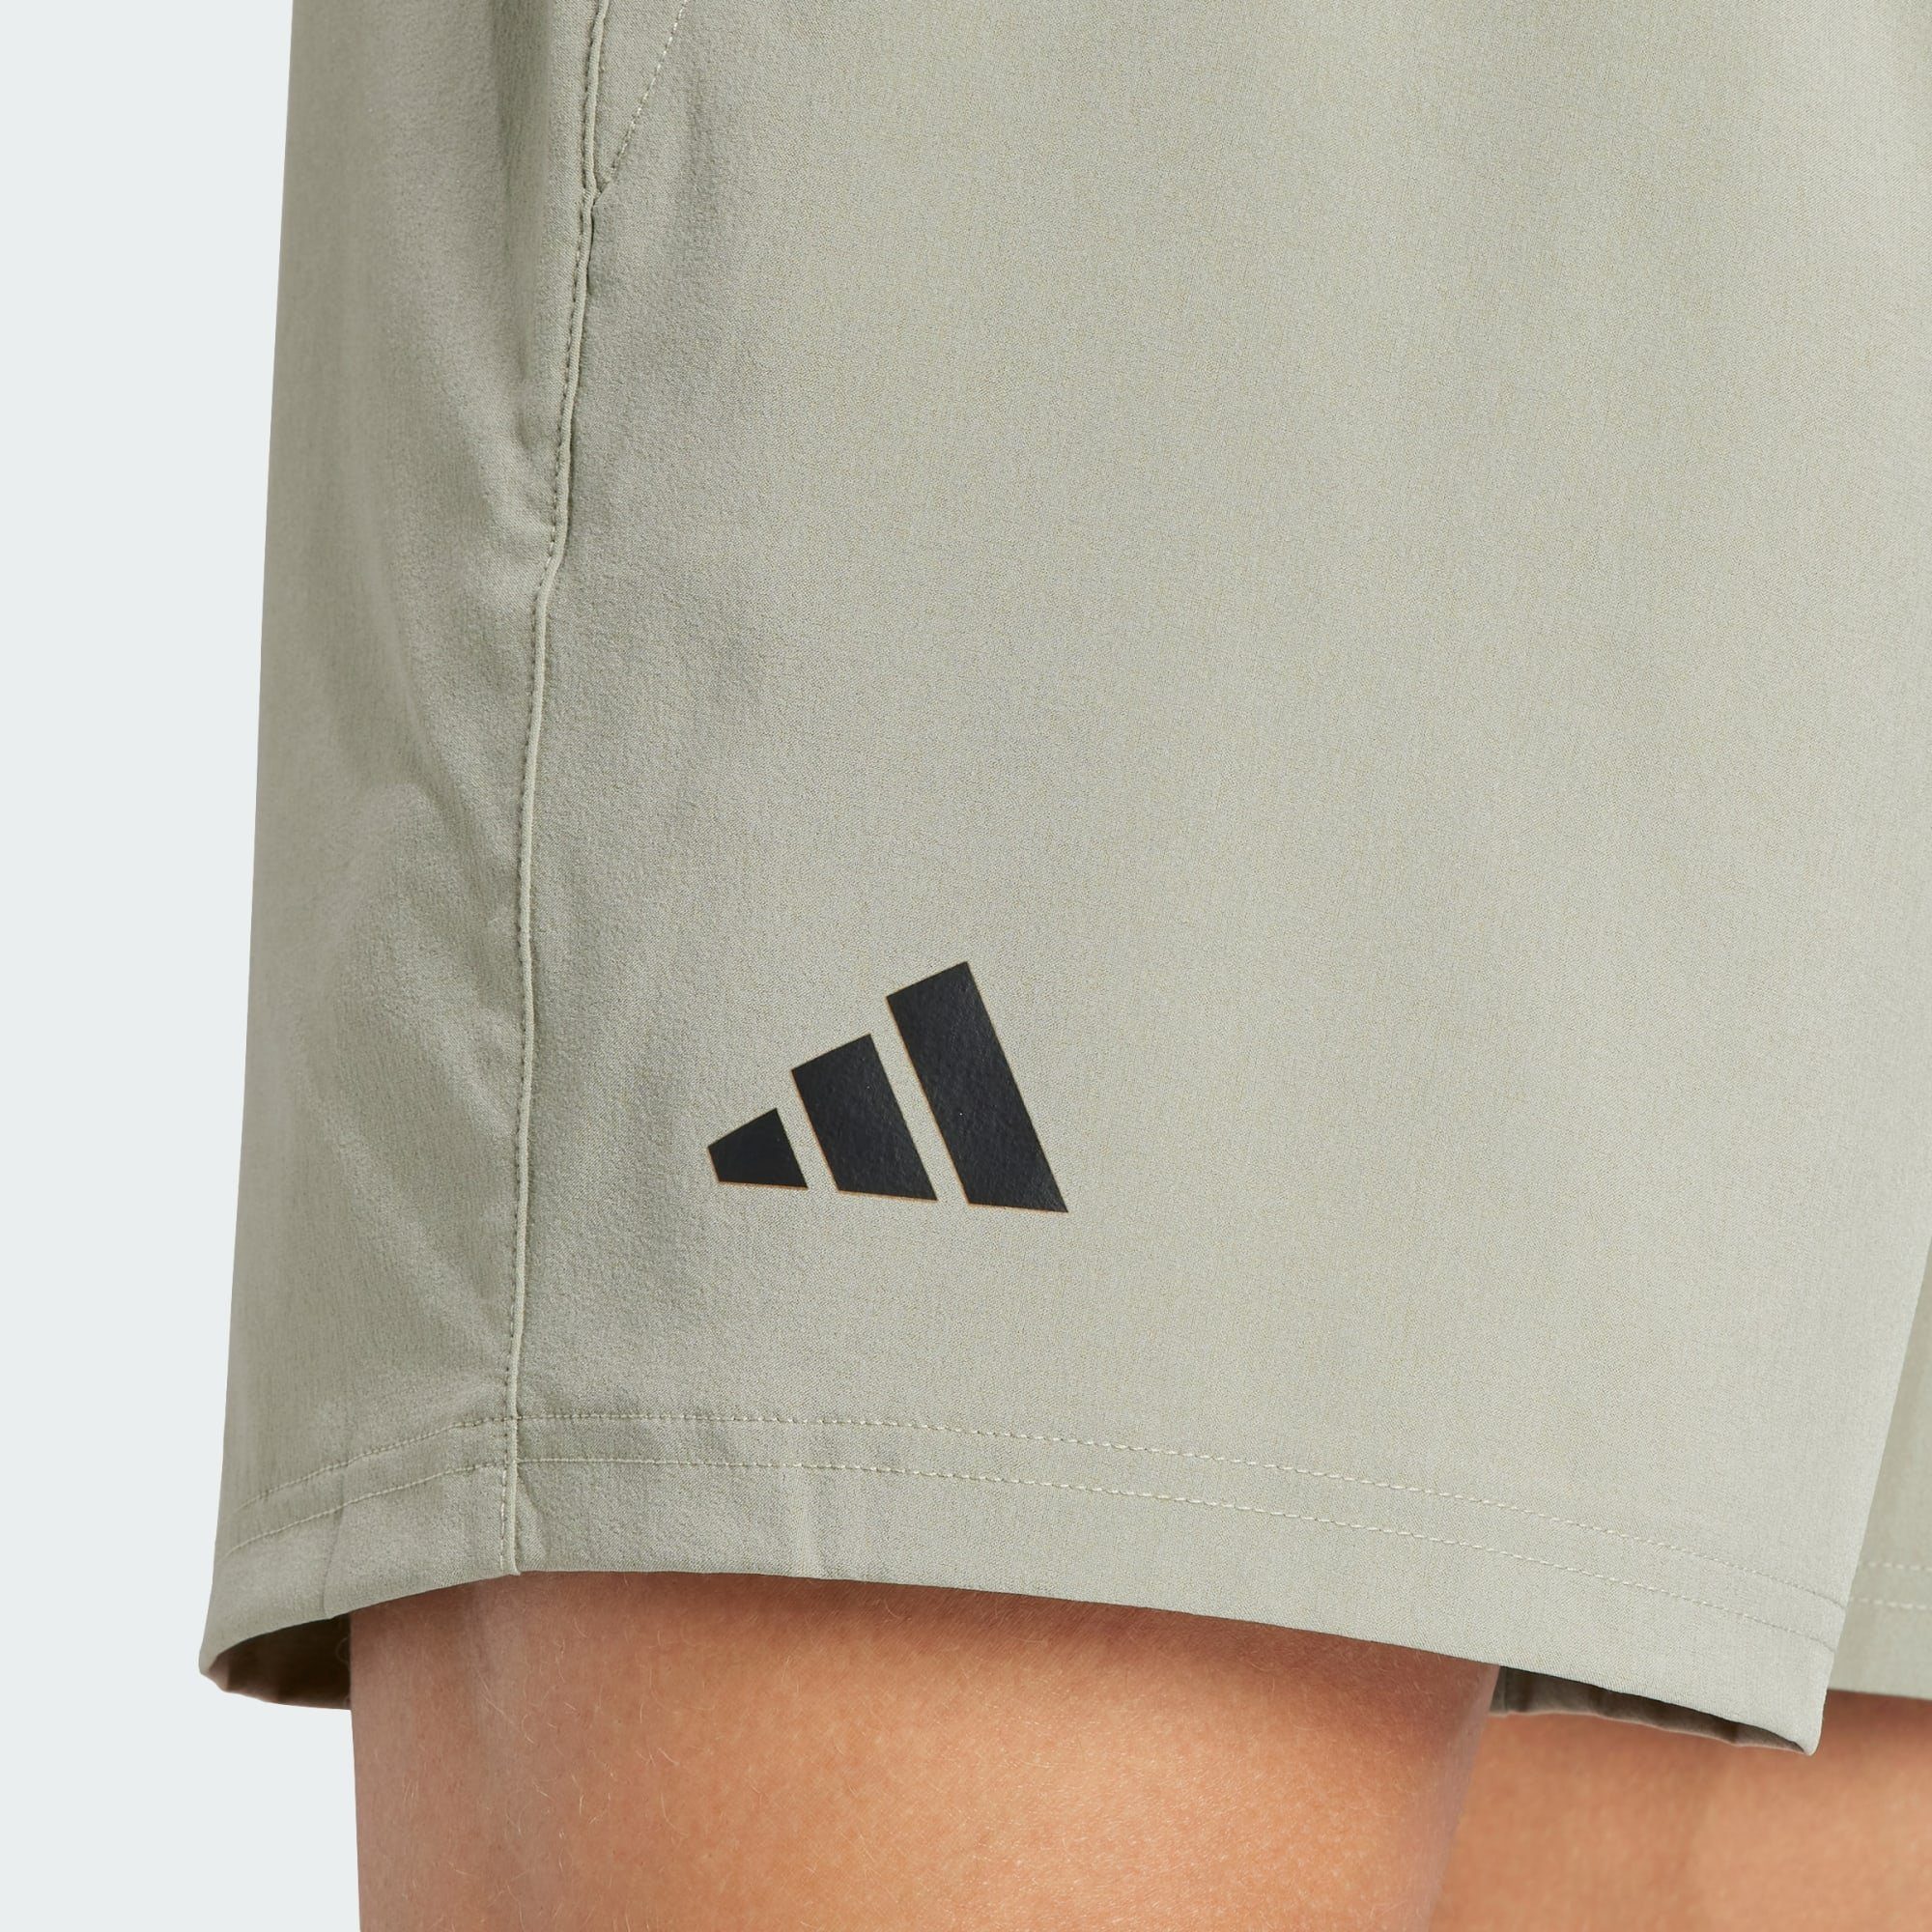 TENNIS STRETCH WOVEN adidas Performance SHORTS Funktionsshorts CLUB Silver Pebble